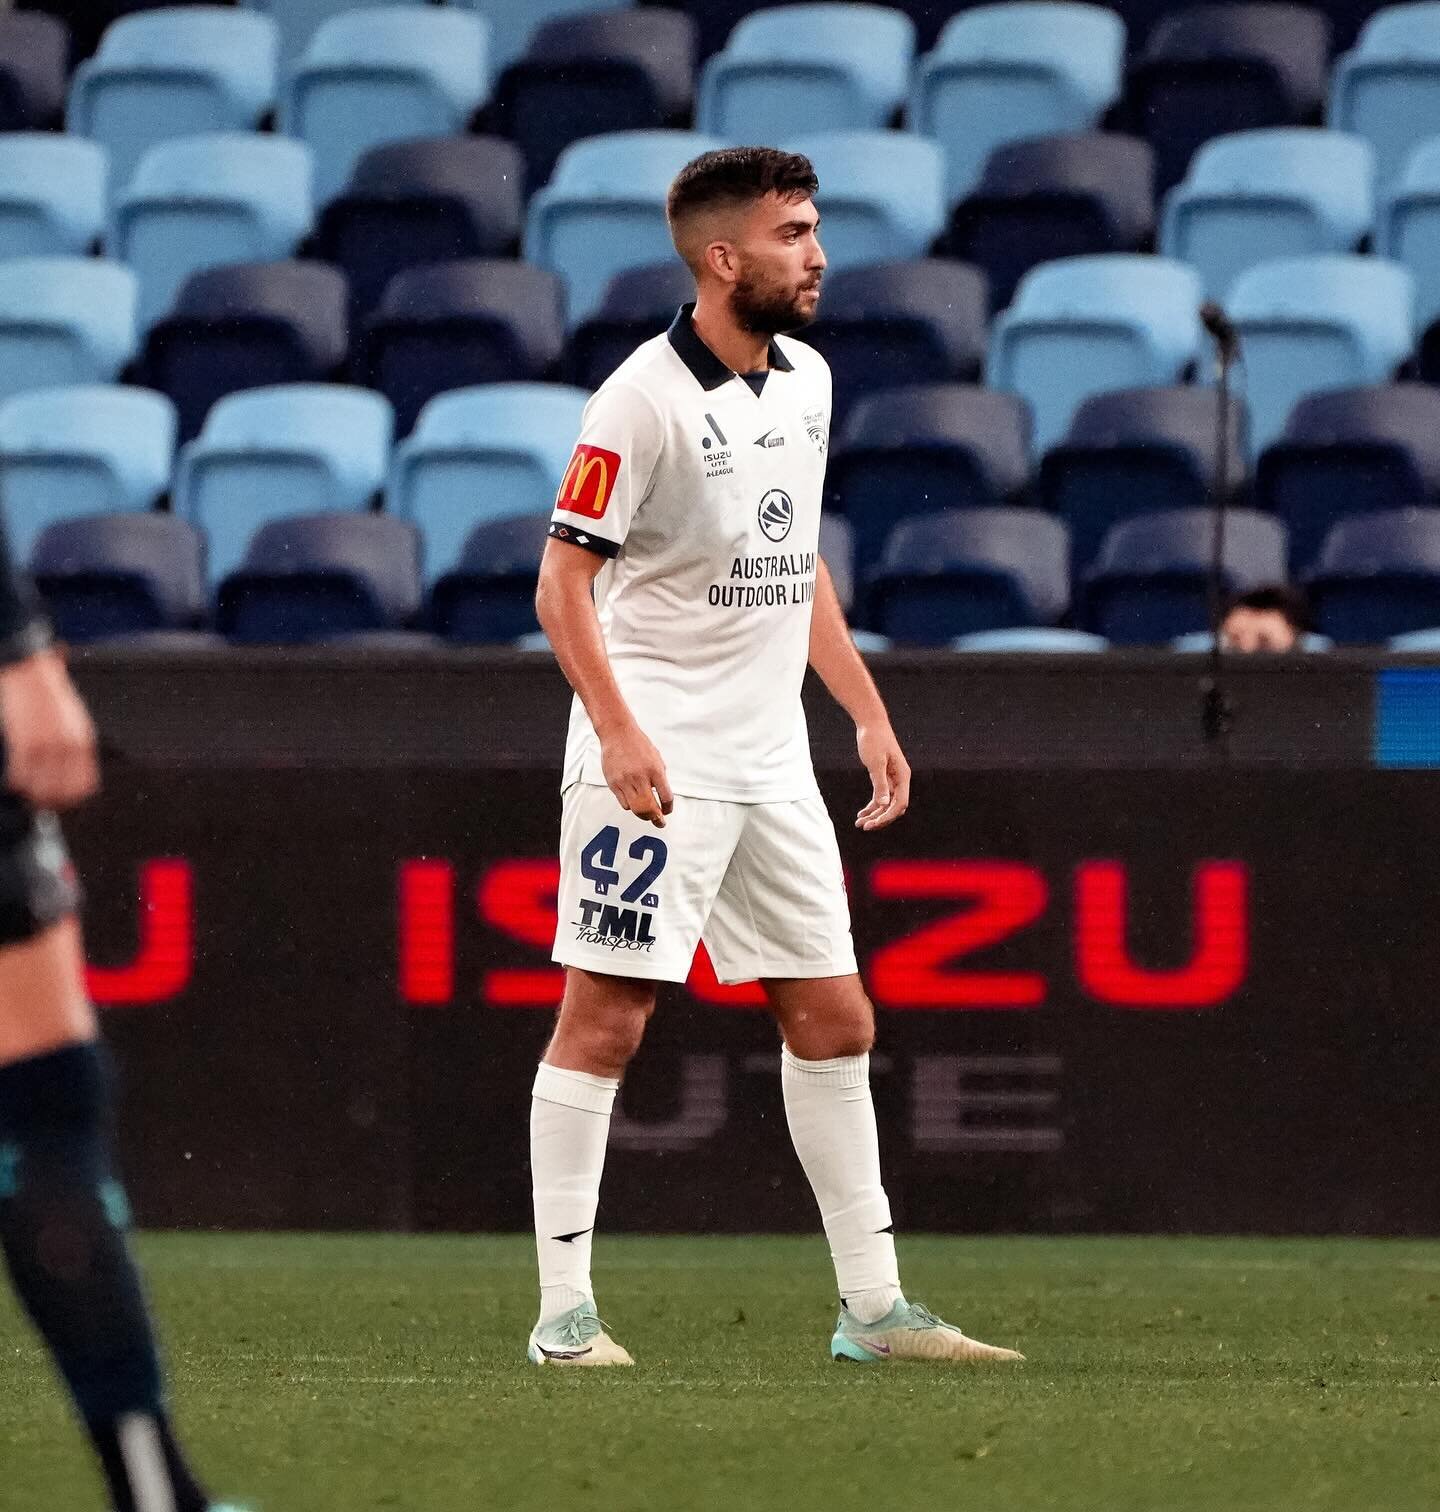 Congratulations @austin.ayoubi Your A-League debut is living proof that hard work and dedication can turn dreams into reality✨

#edgesox #adelaideunited #gripsocks #football #soccer 📸 @courtneypedlar_